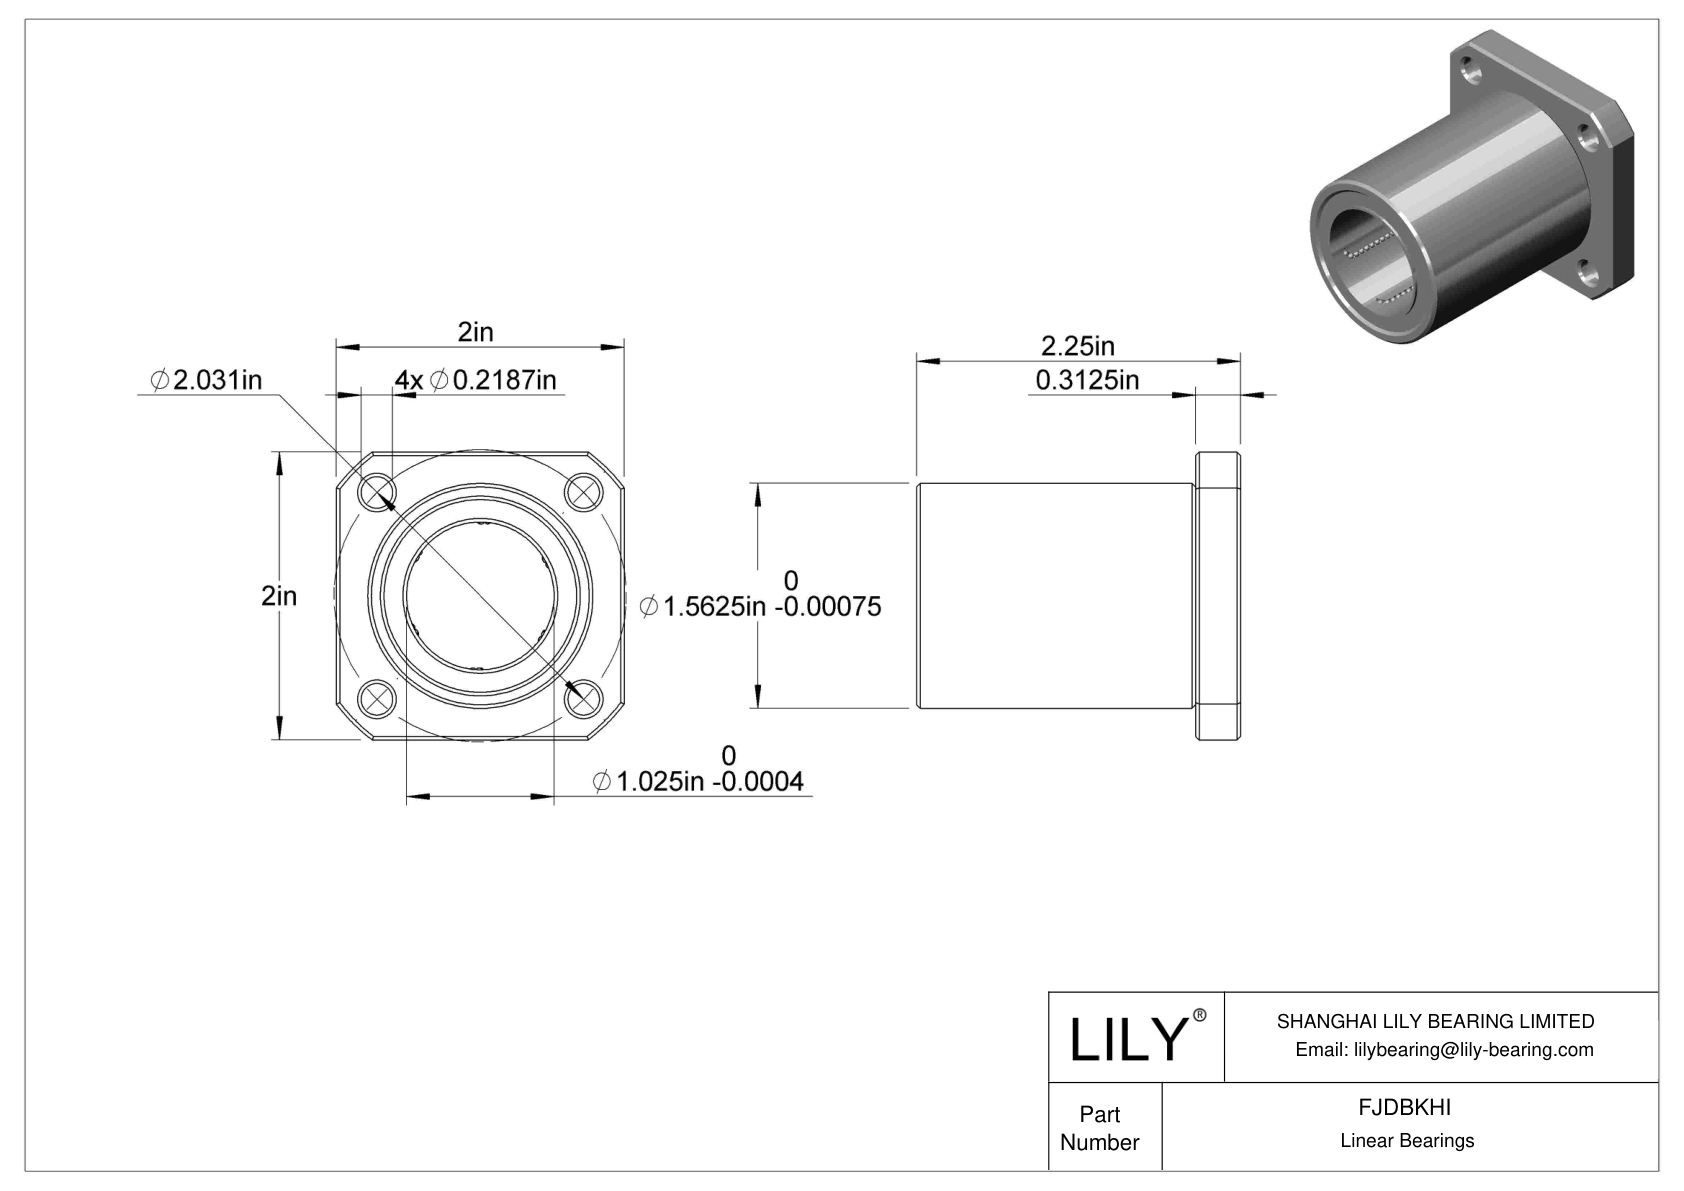 FJDBKHI Corrosion-Resistant Flange-Mounted Linear Ball Bearings cad drawing